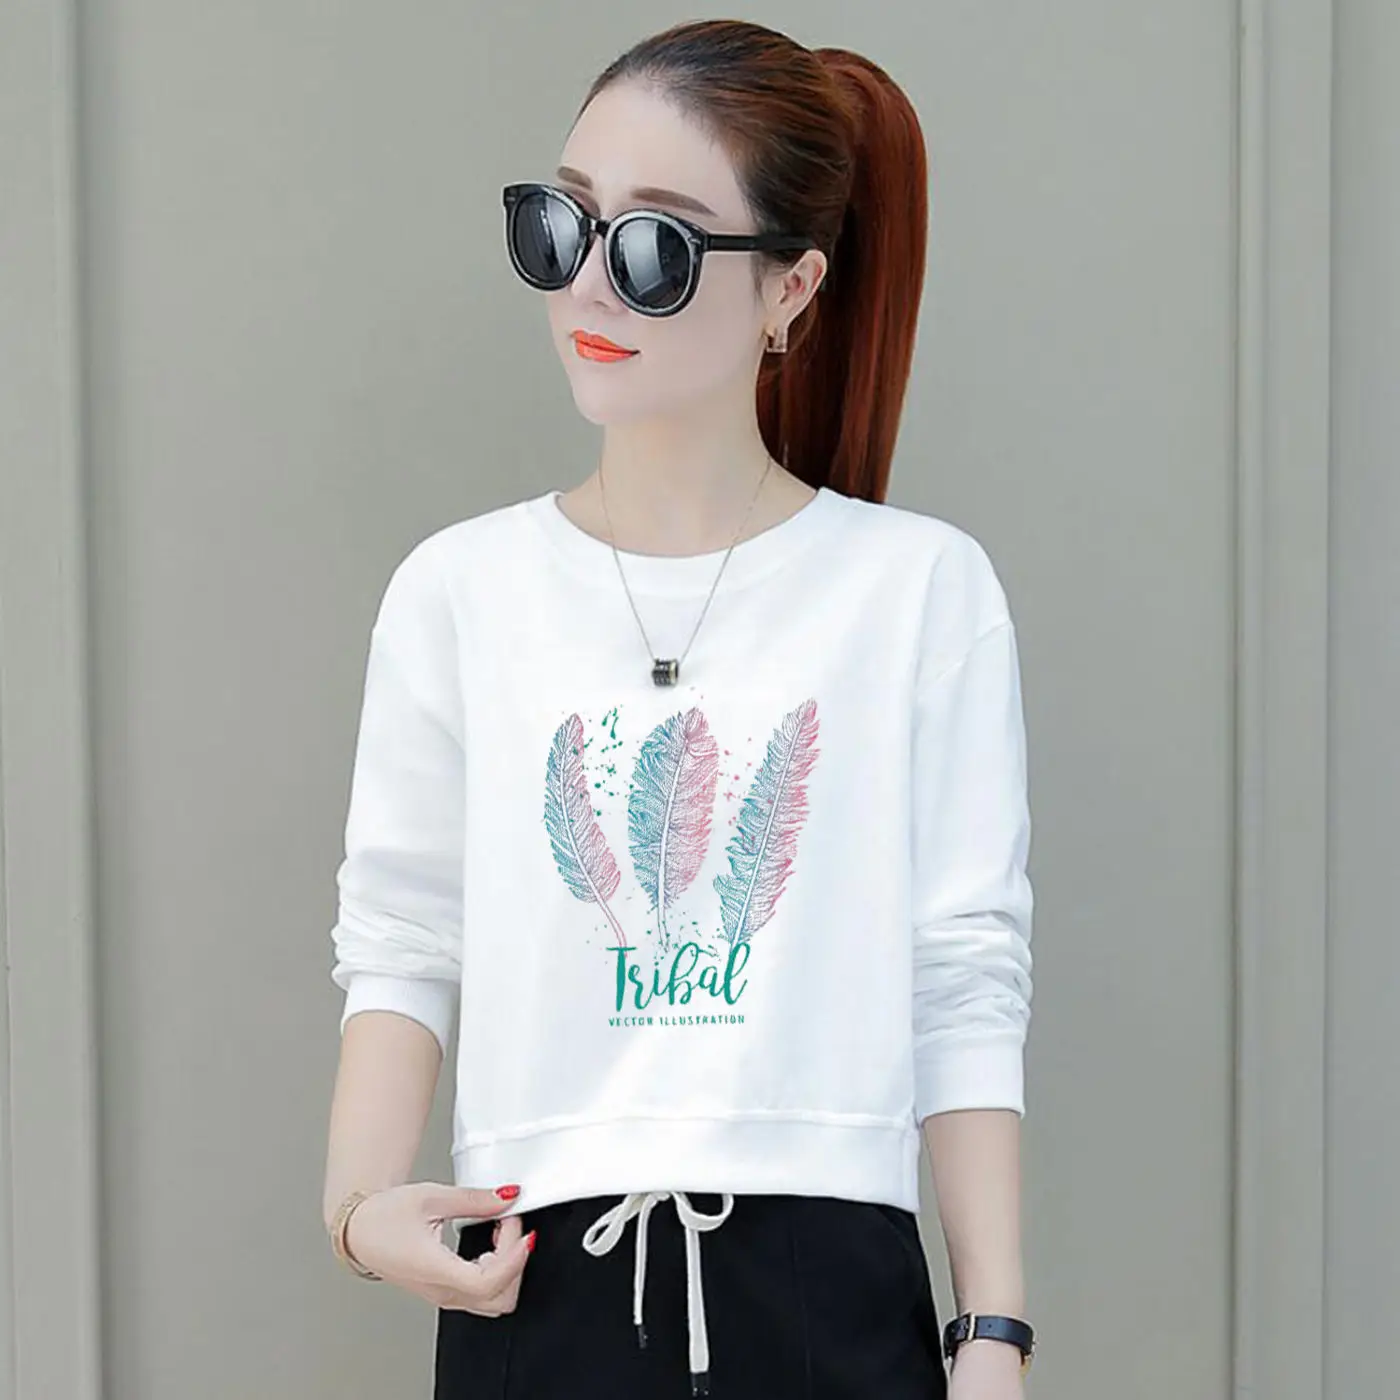 

High can't contain cotton ball with high waist fleece female qiu dong han edition short fashion long-sleeved blouse loose t-shir